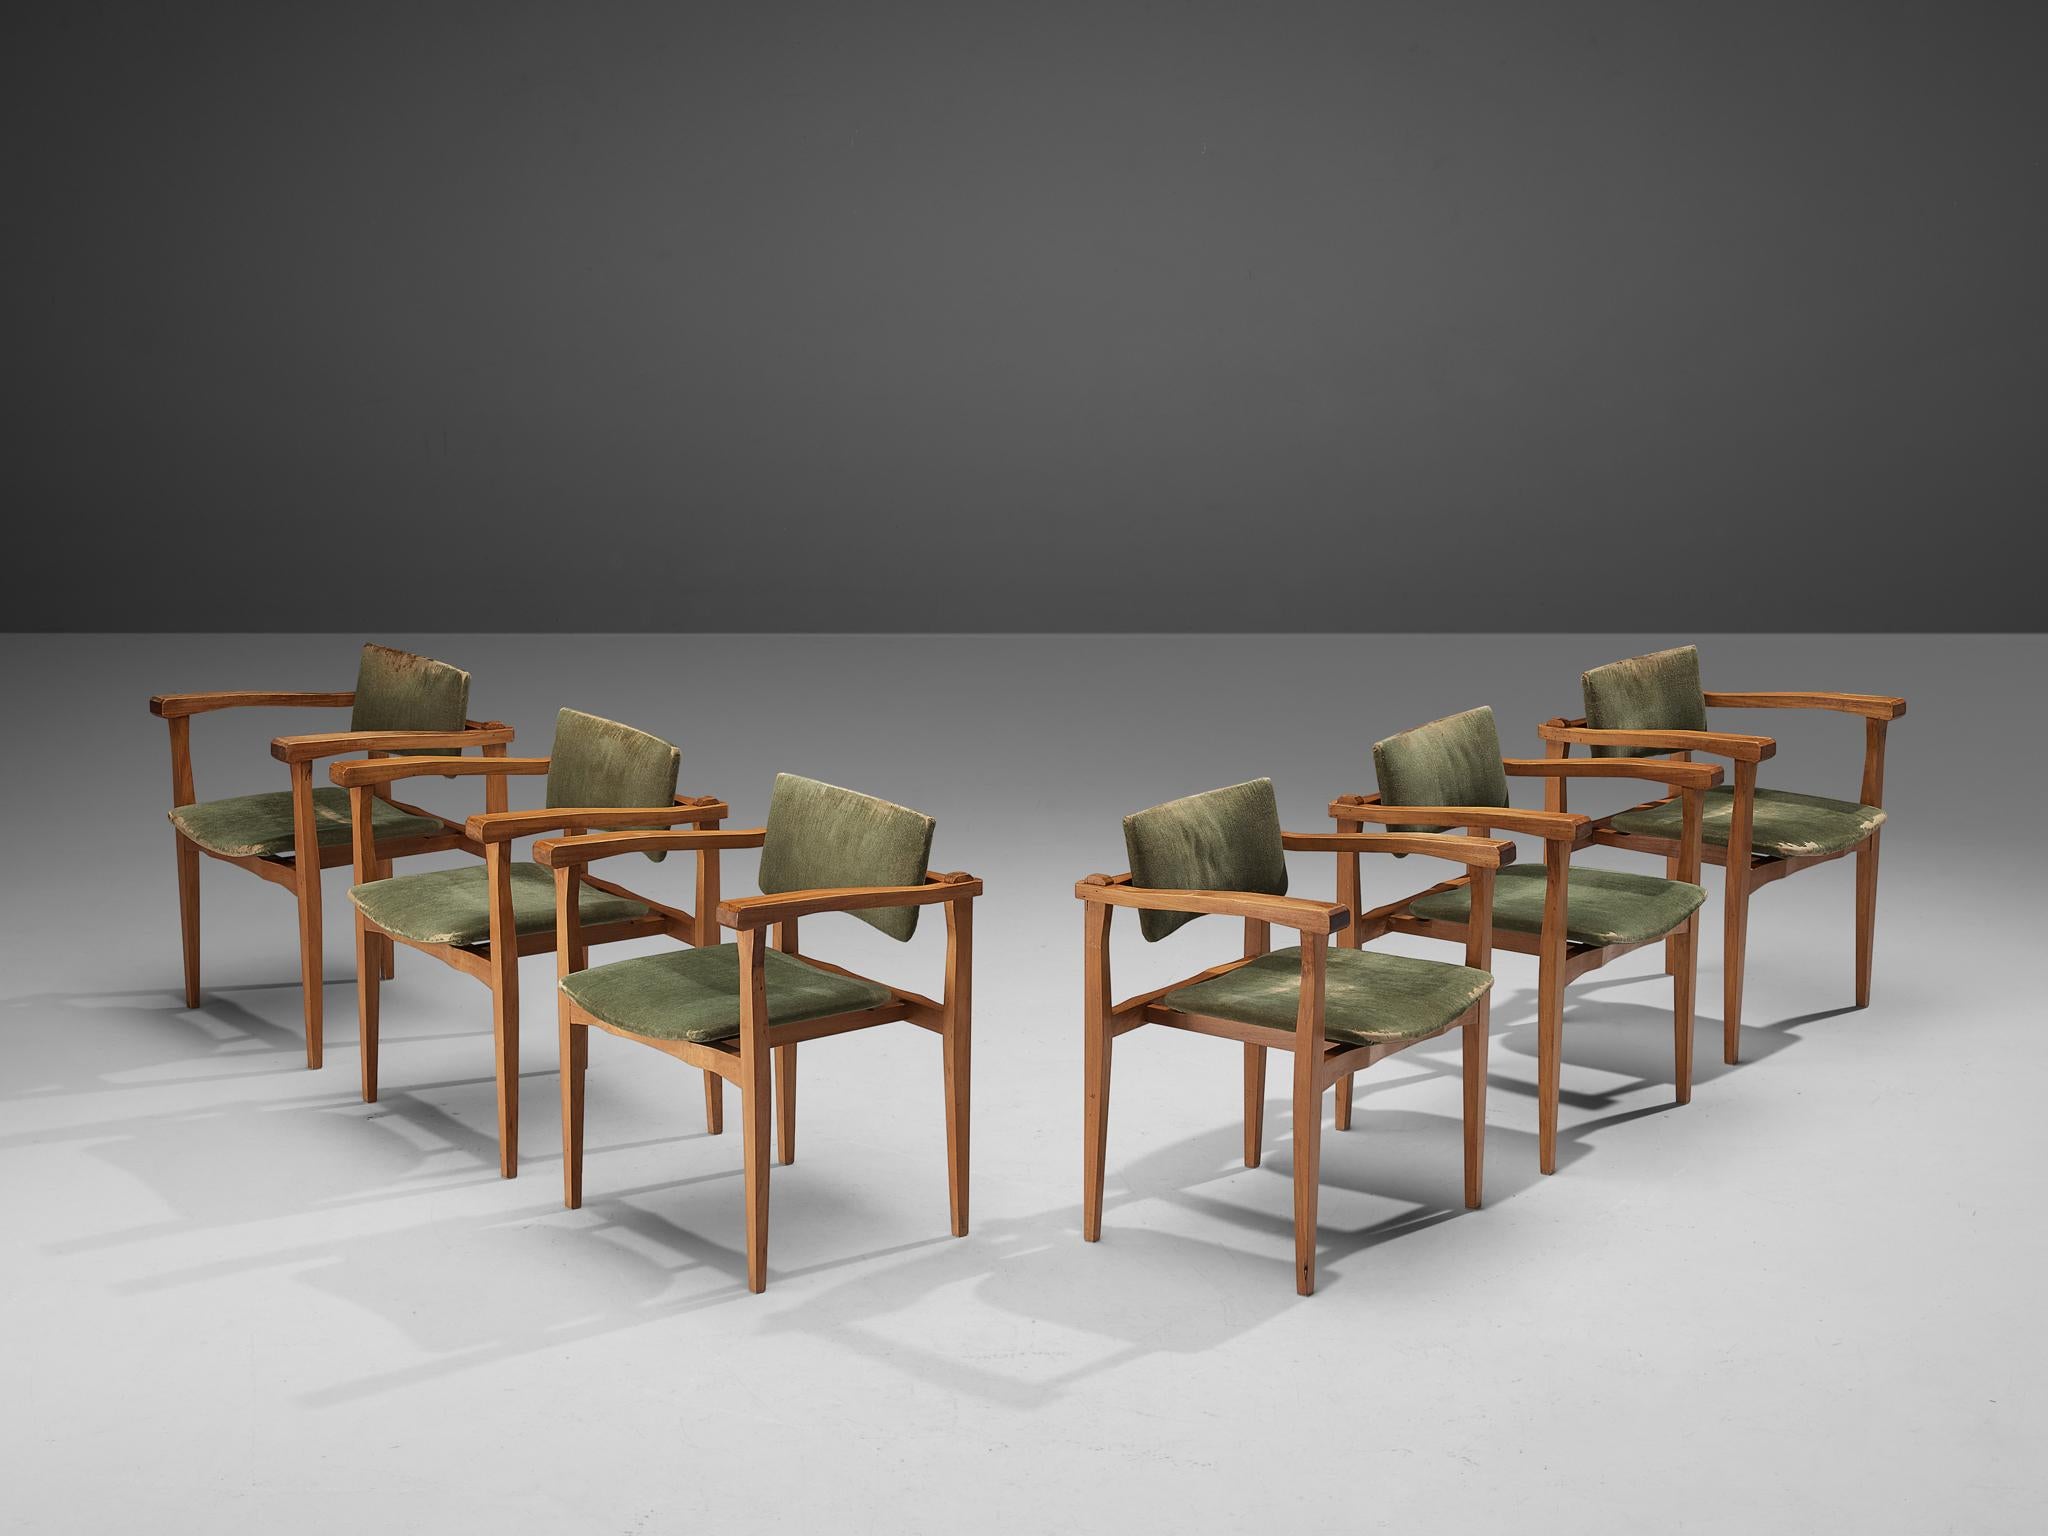 Set of six armchairs, walnut, velvet, Italy, 1960s.

This set of six armchairs made in Italy is modest and pure in its design. The chairs feature an open and architectural walnut wooden frame, build up from horizontal and vertical lines. The